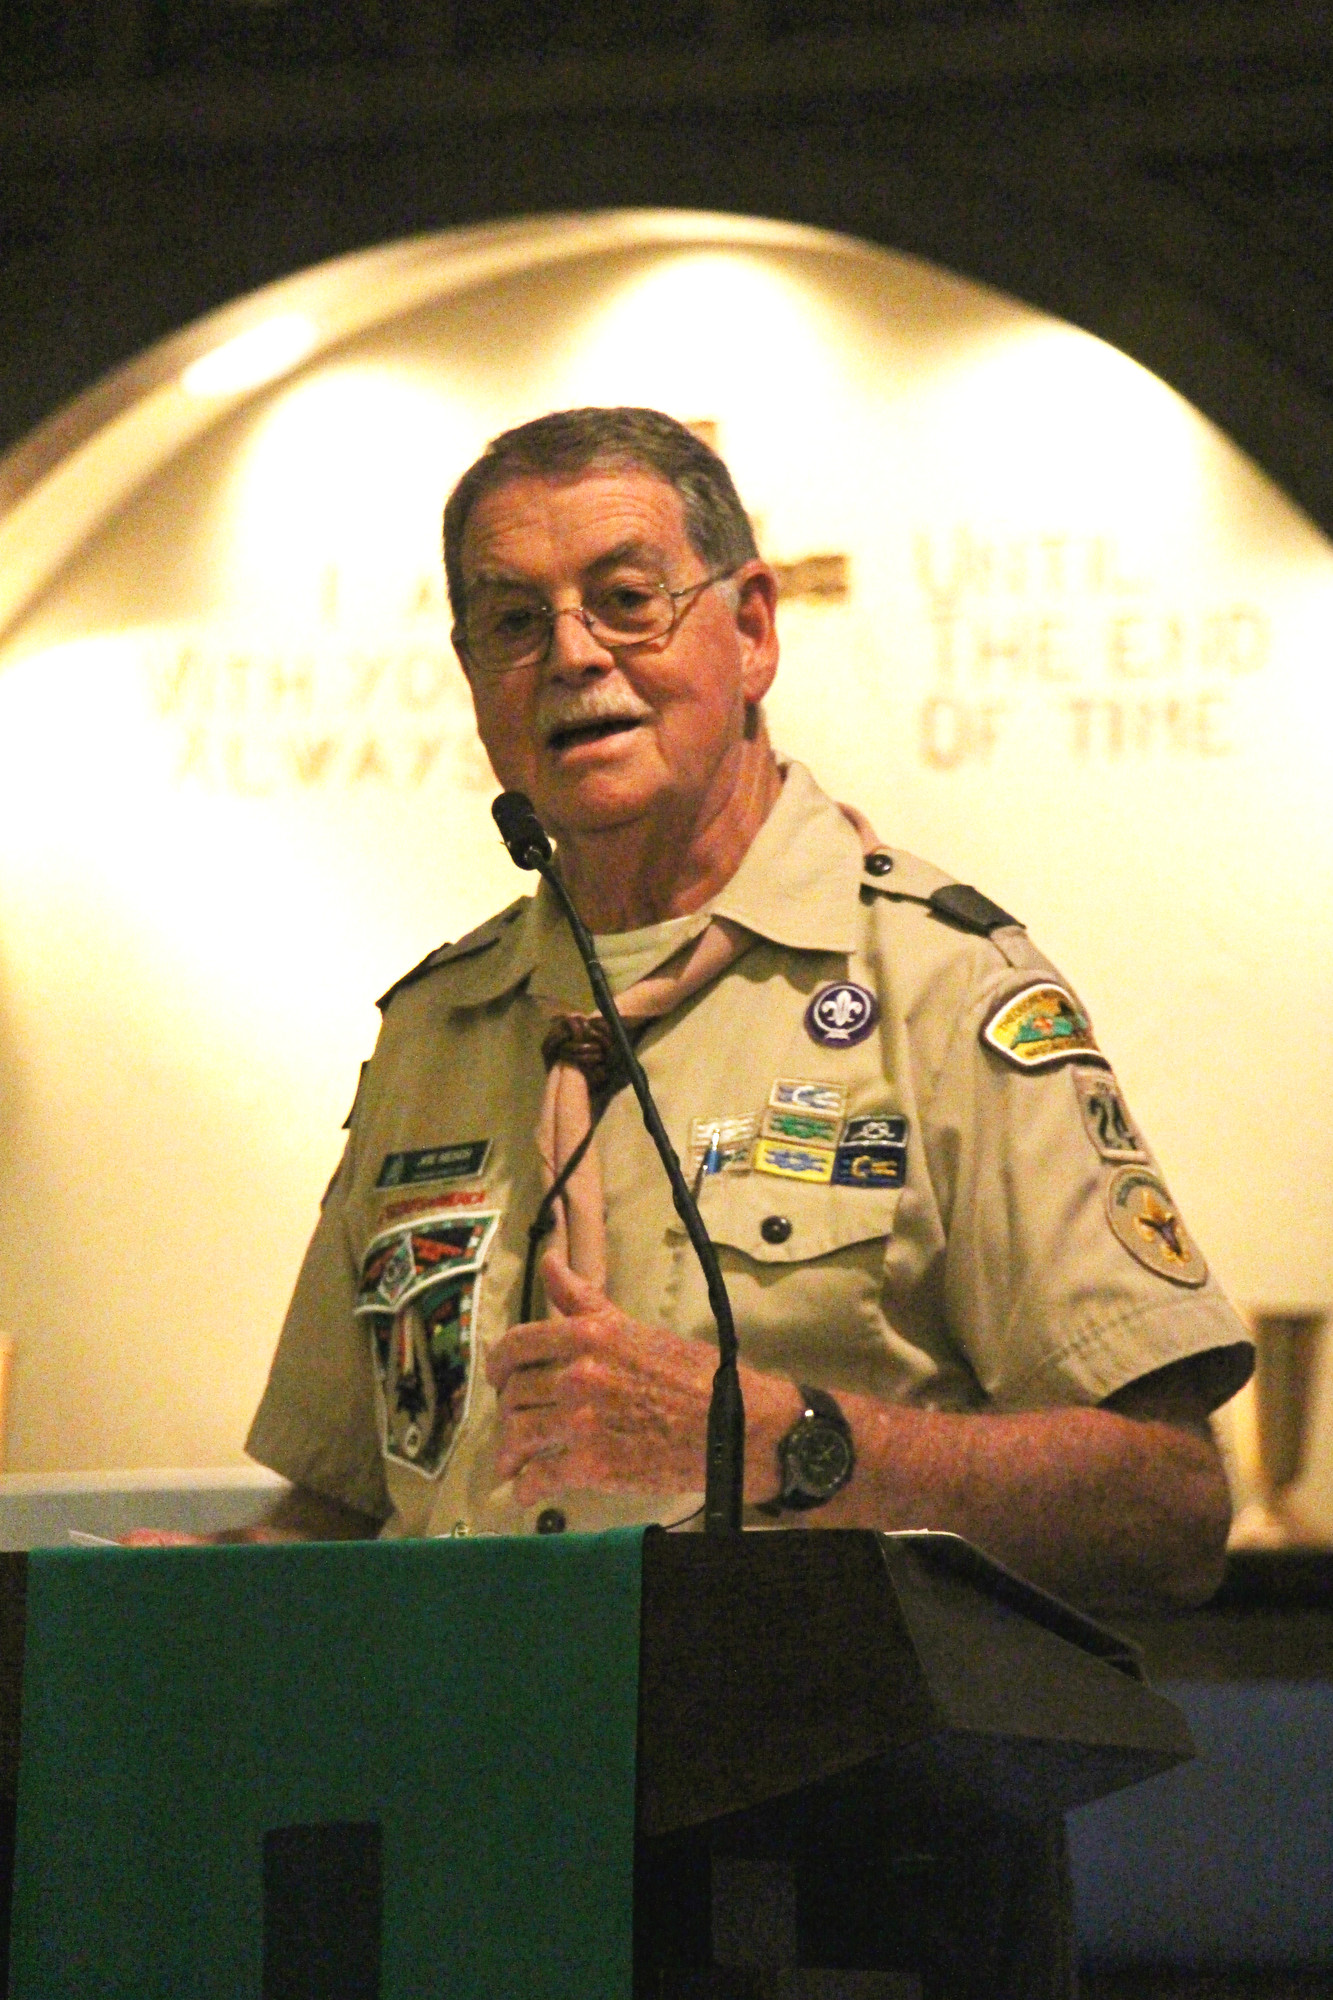 Scoutmaster Joe Resch has been volunteering for the Boy Scouts Troop 24 for roughly 30 years.